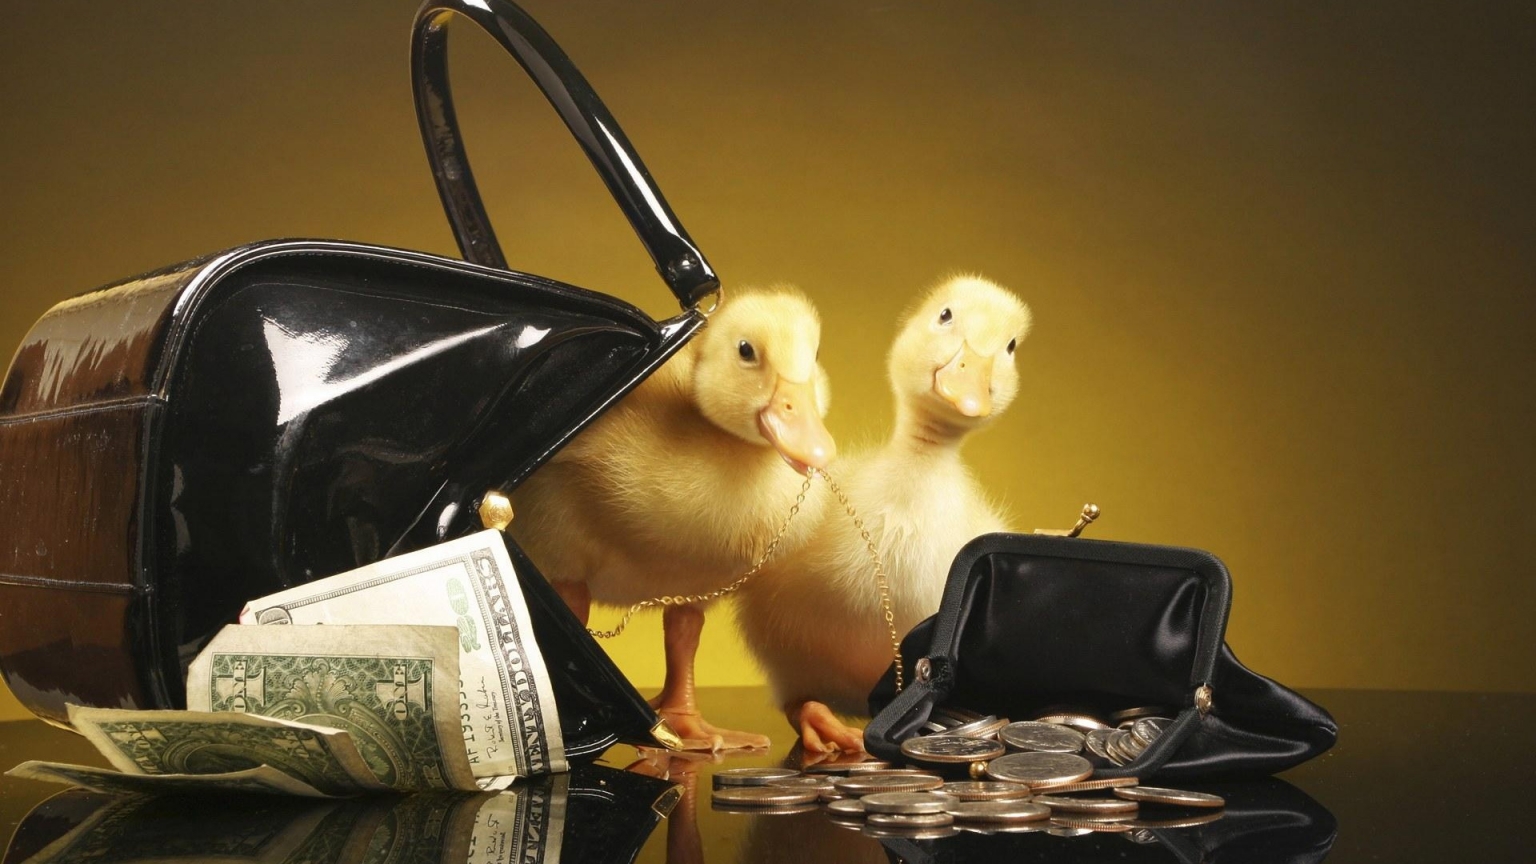 Ducklings with purse and money for 1536 x 864 HDTV resolution